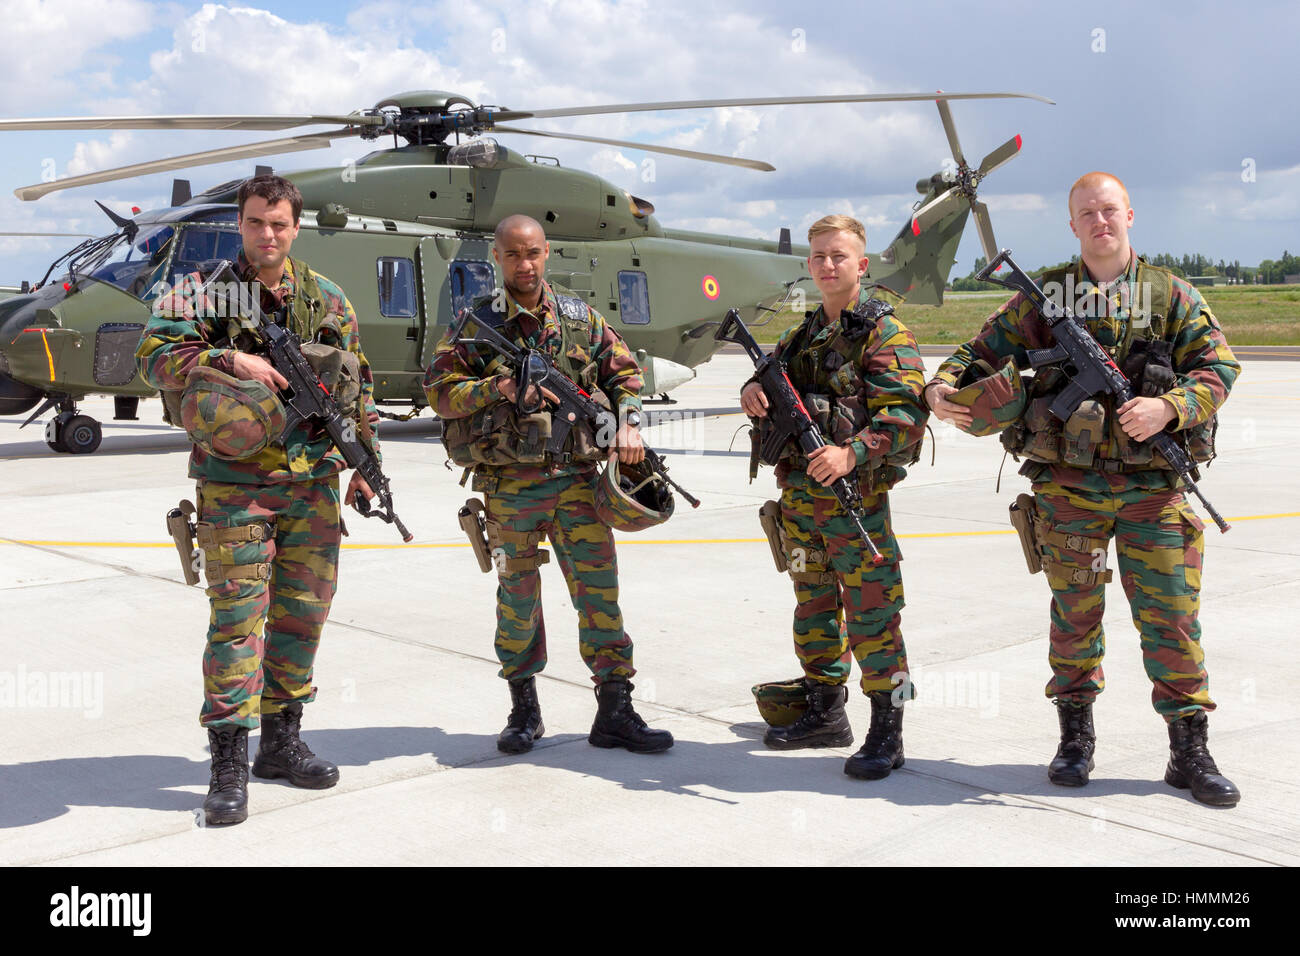 BEAUVECHAIN, BELGIUM - MAY 20, 2015: Belgian army soldiers in front of the new NH90 helicopter during the THPU exercise. THPU is an annual helicopter  Stock Photo